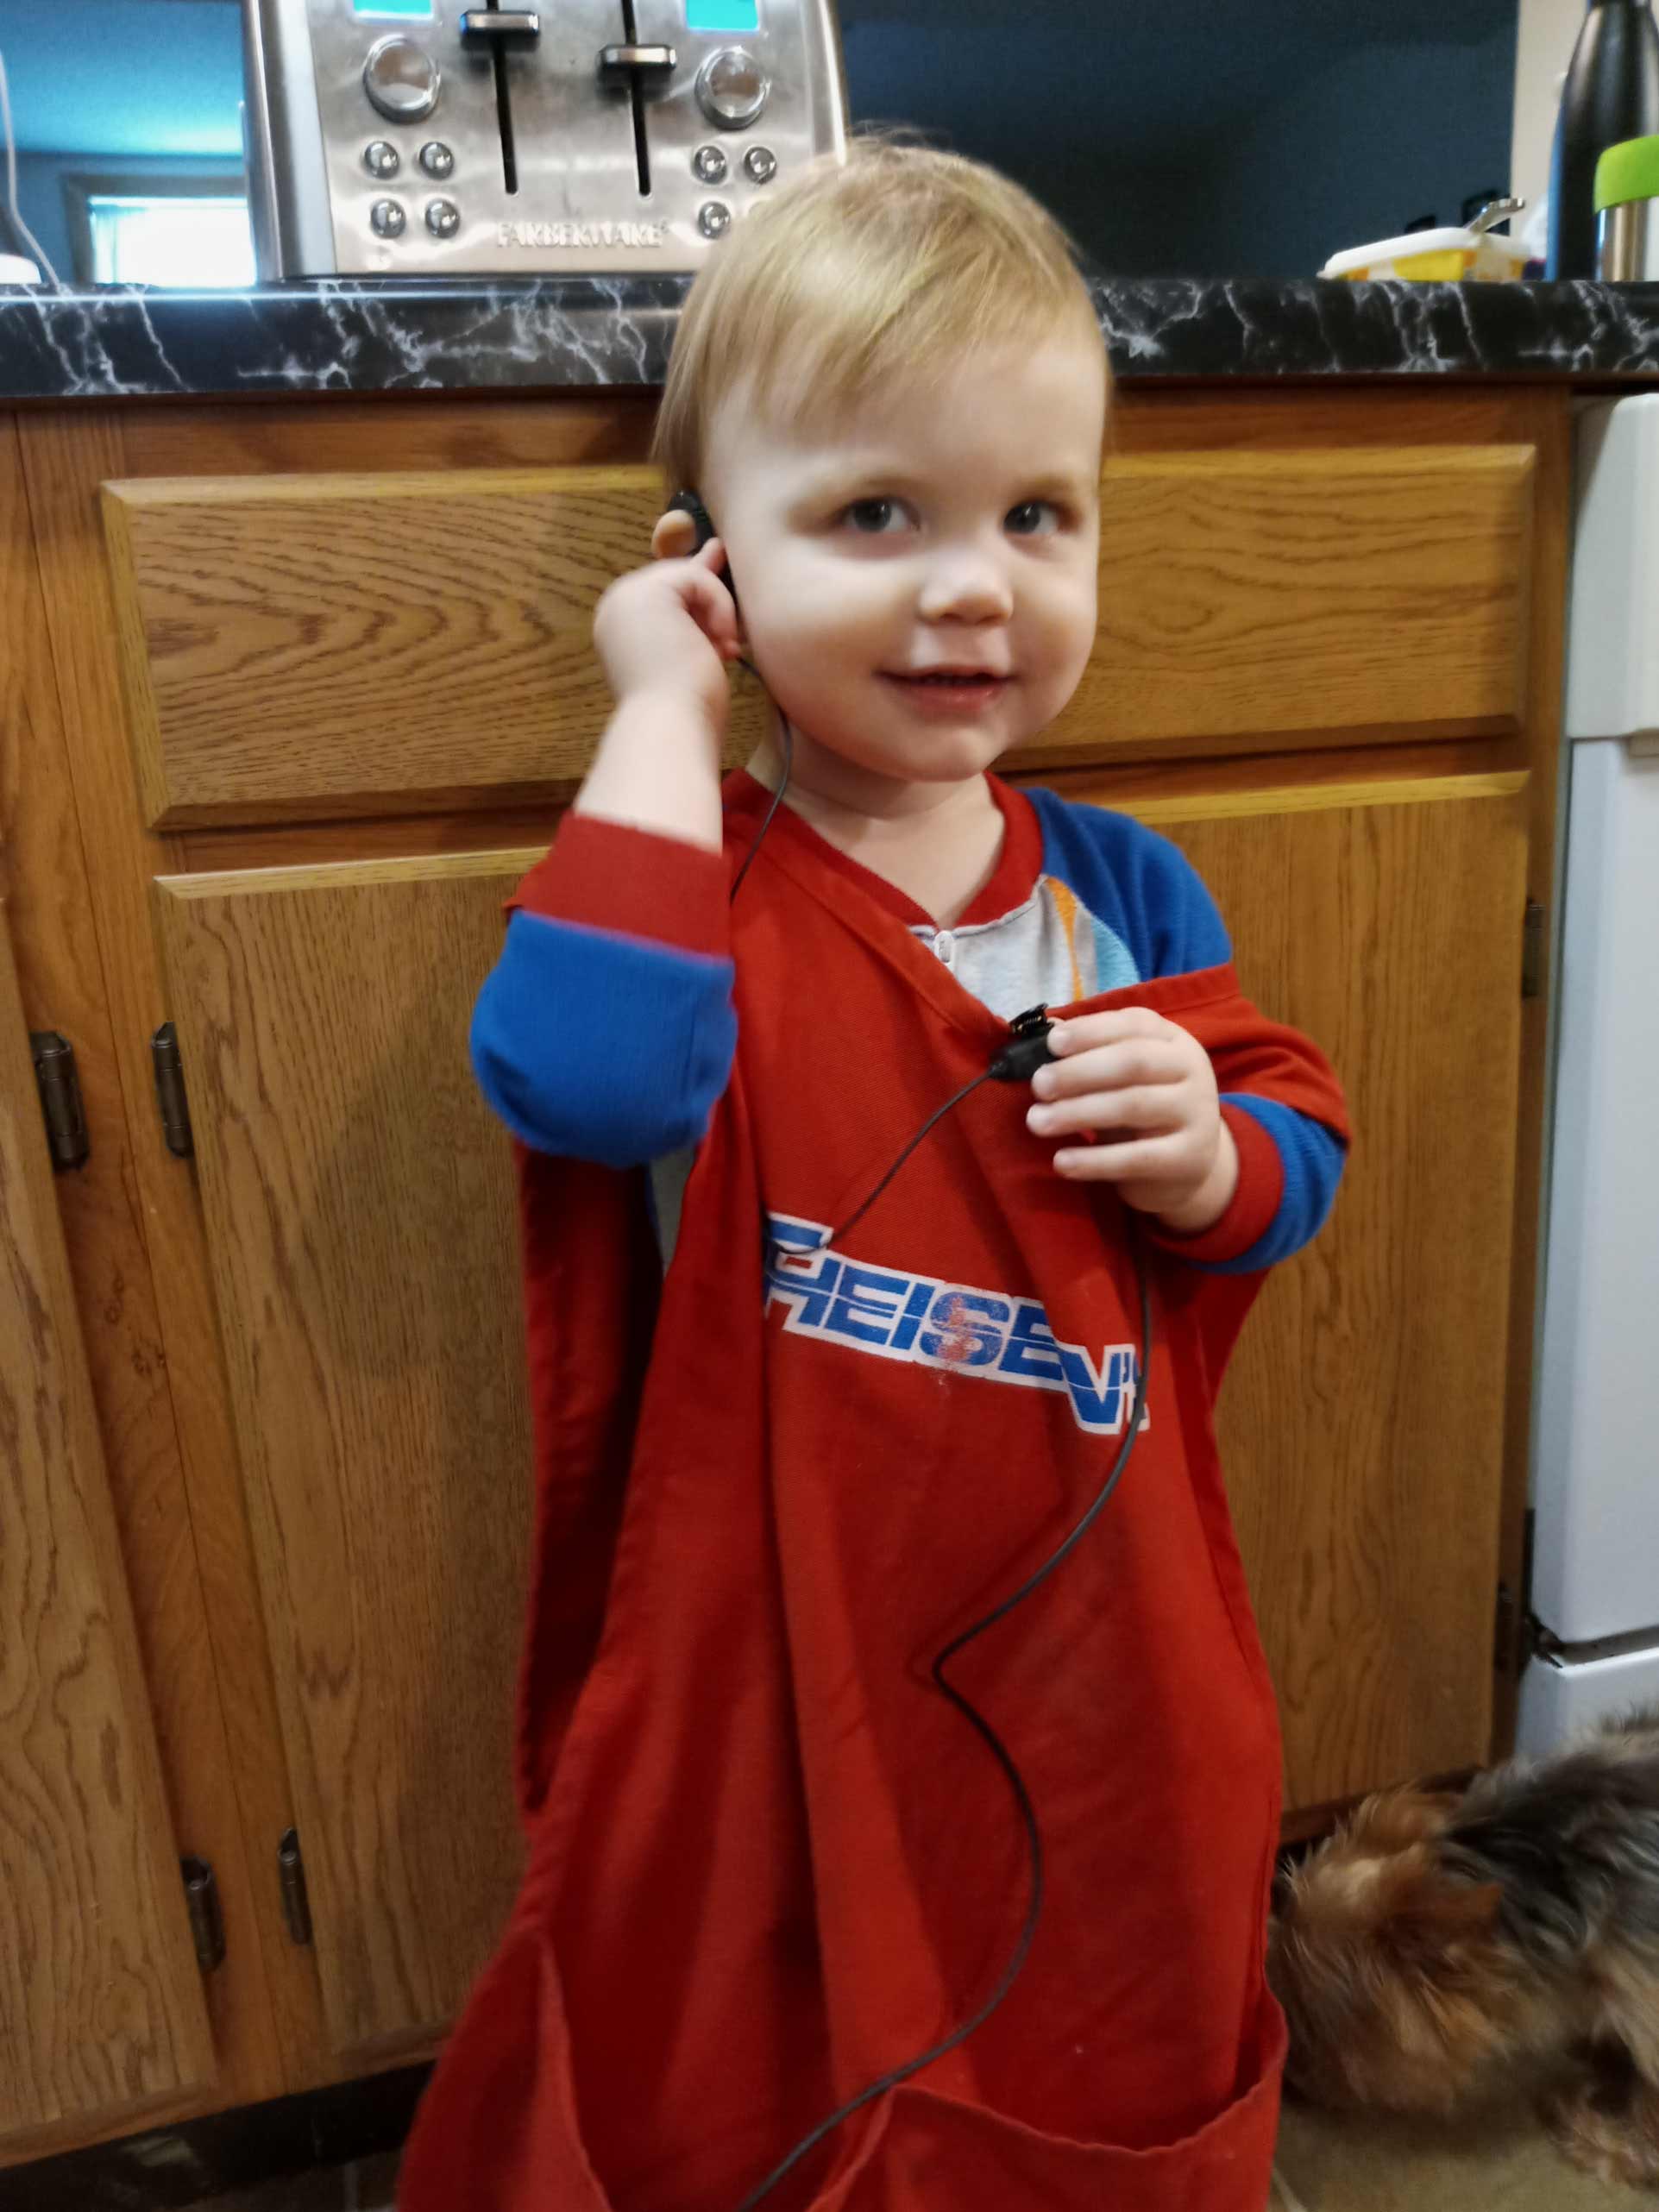 Mosie toddler with blonde hair, wearing red and blue jumpsuit